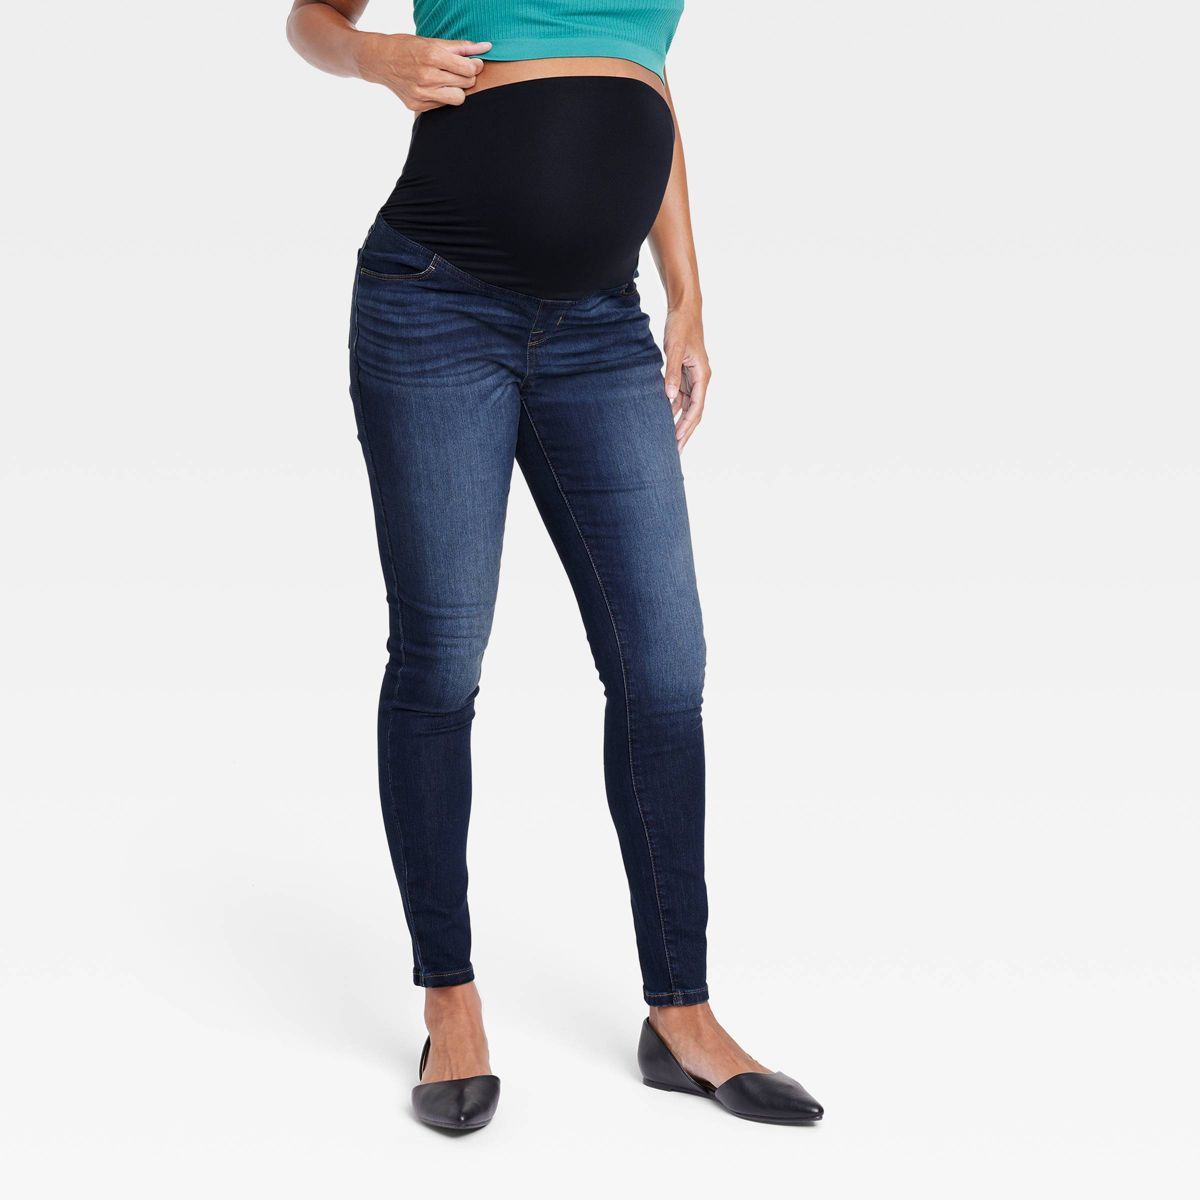 Over The Belly Dark Wash Skinny Maternity Jeans - Isabel Maternity by Ingrid & Isabel™ Dark Was... | Target